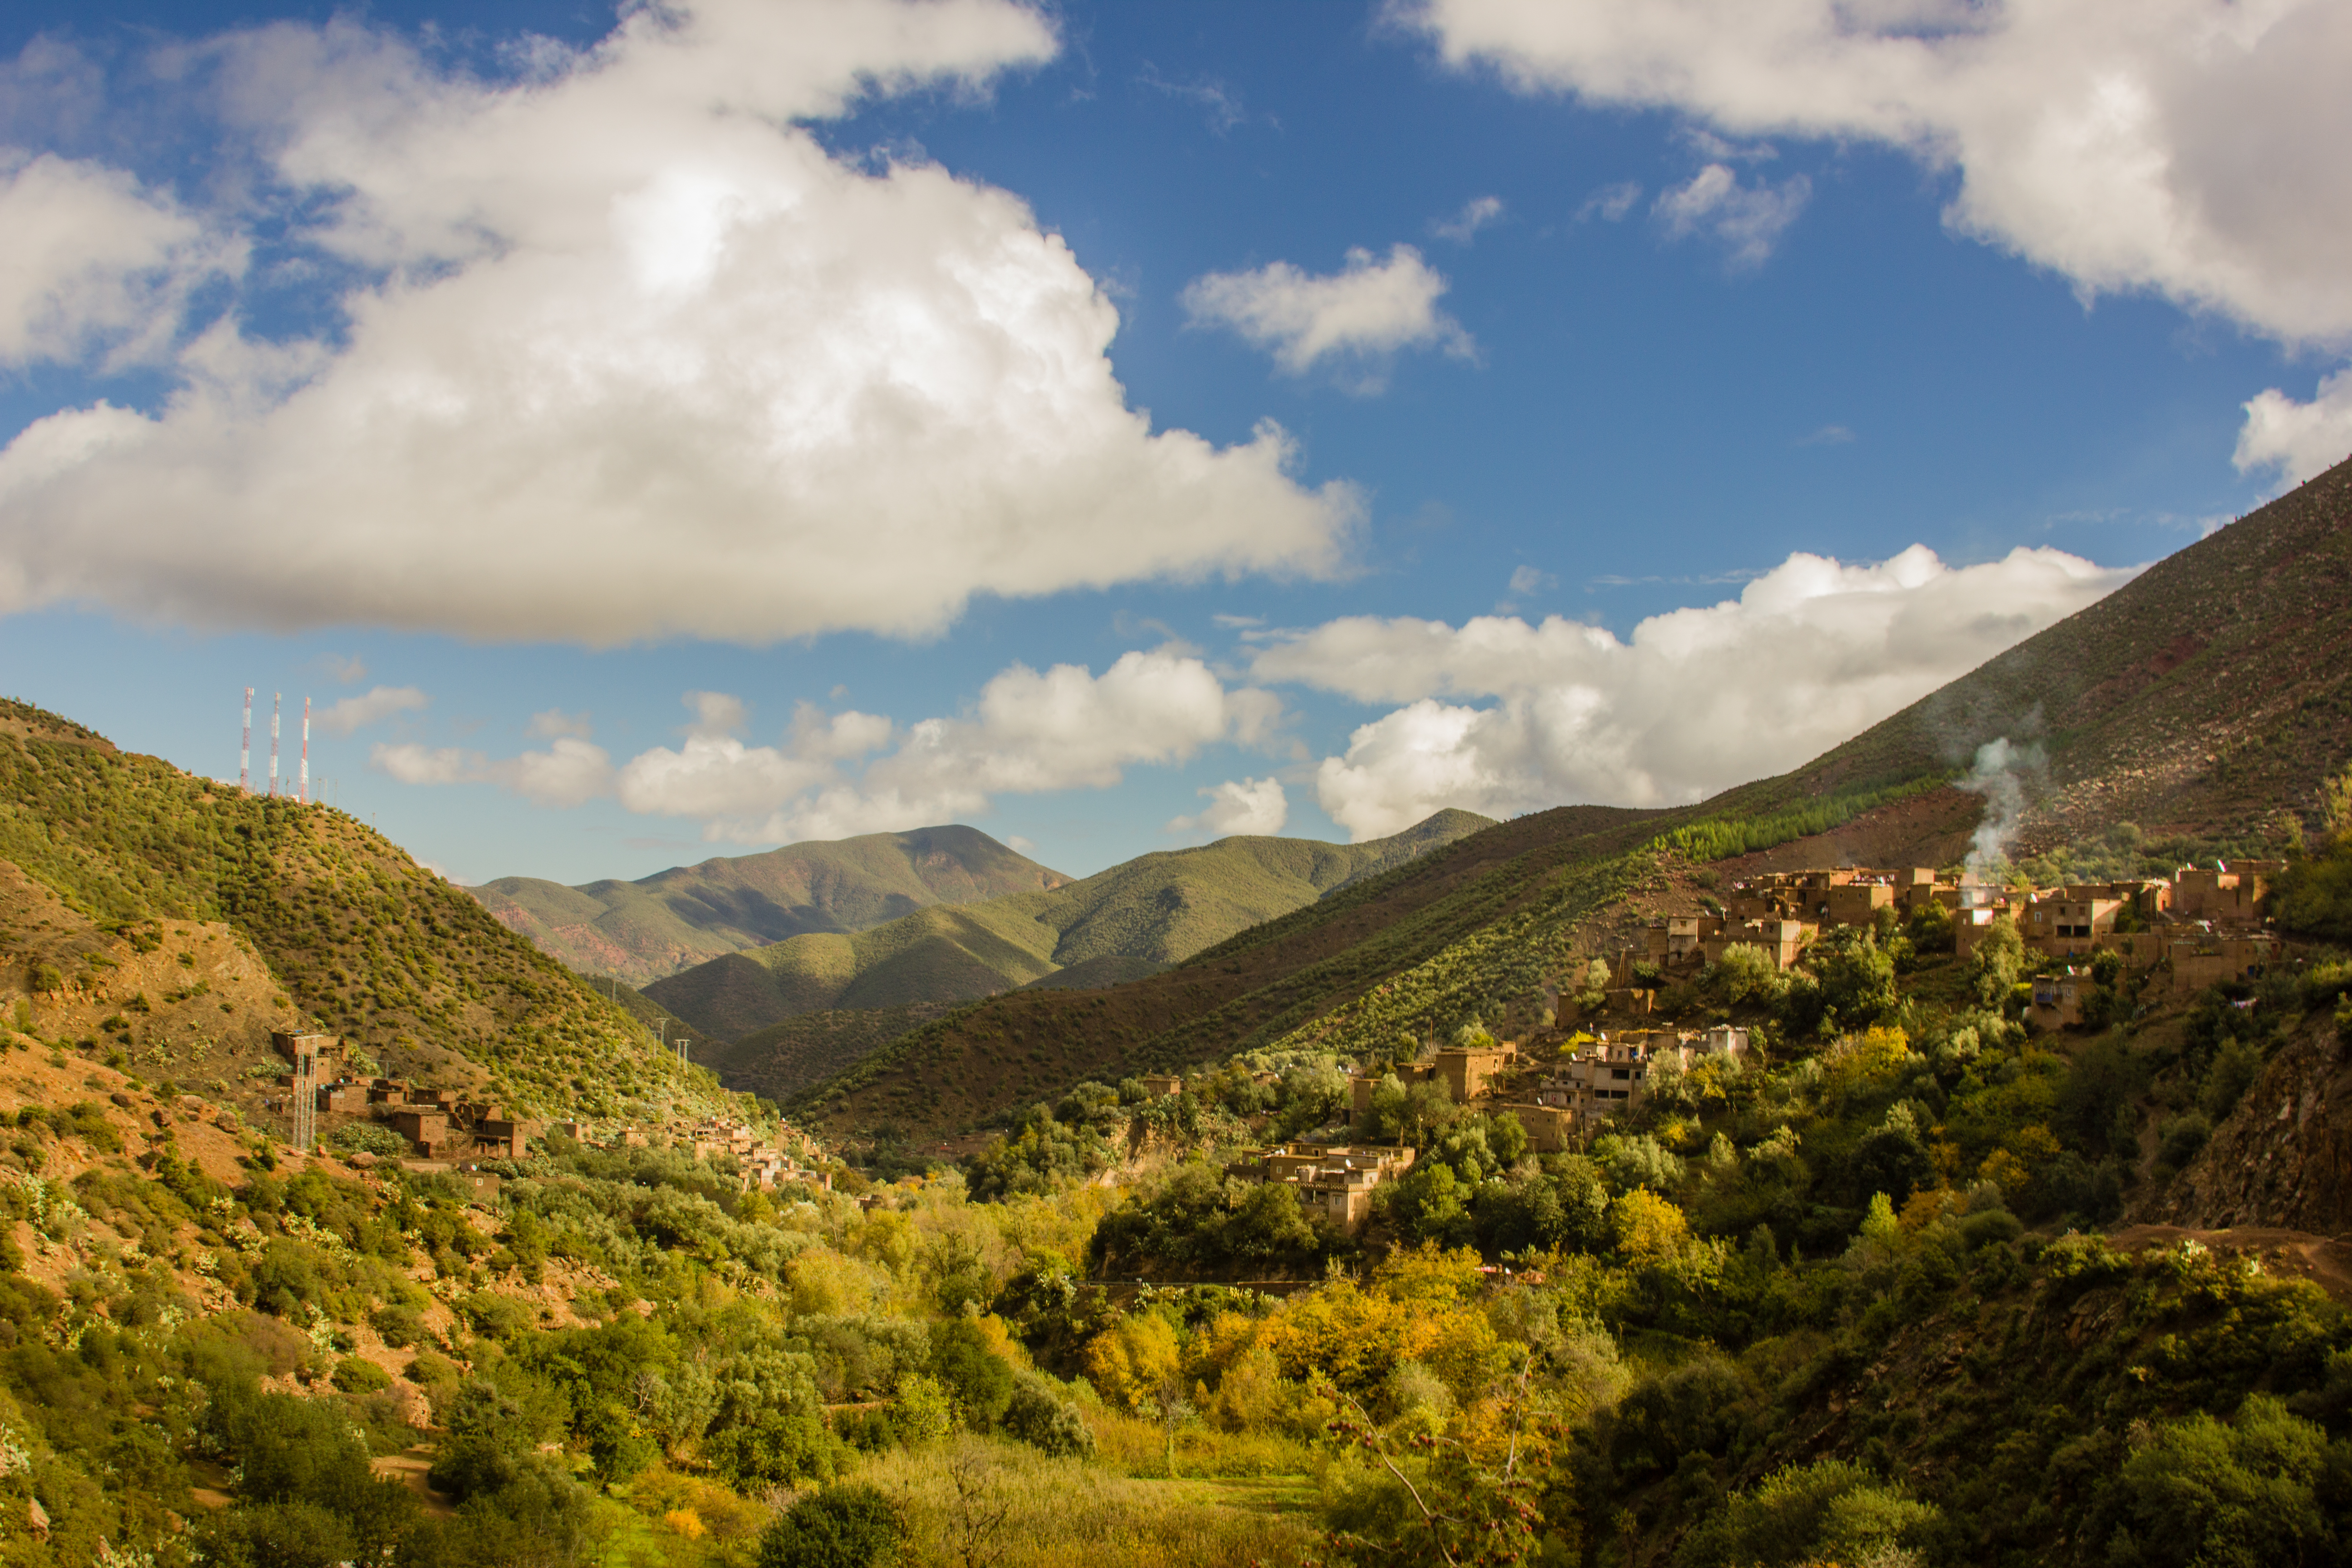 A lush green valley in the Atlas Mountains of Morocco